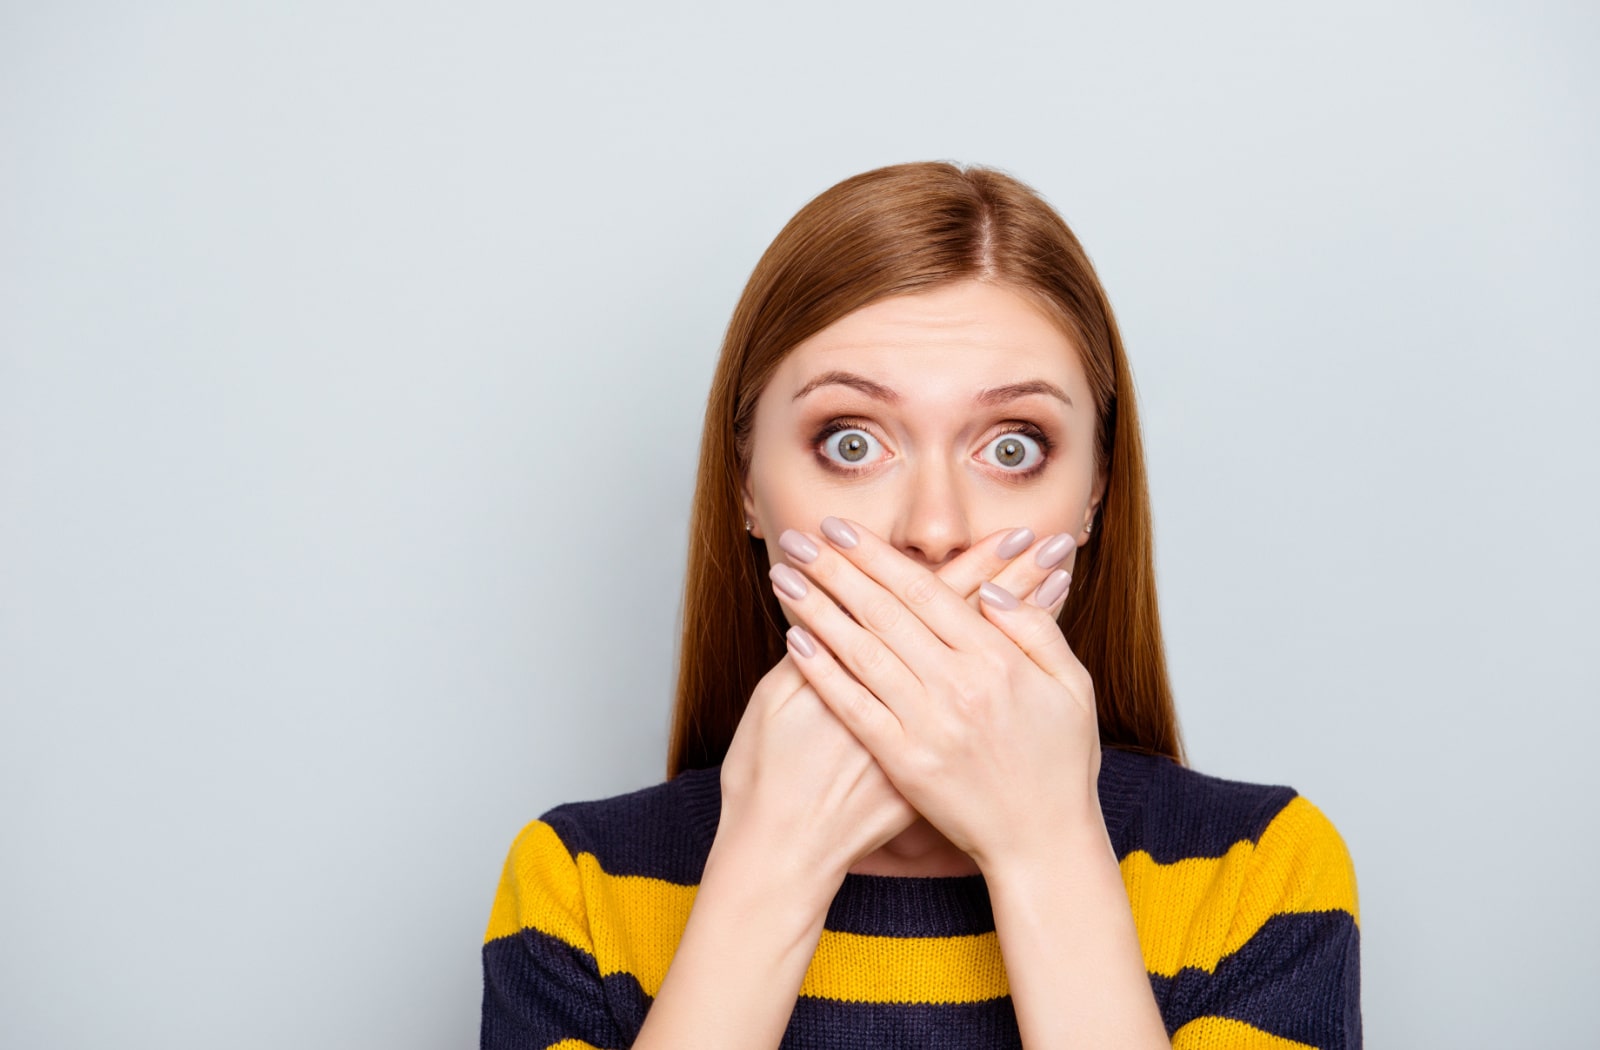 A woman wearing a black and yellow striped sweater covers her mouth with both hands, because she is surprised her breath smells unpleasant.